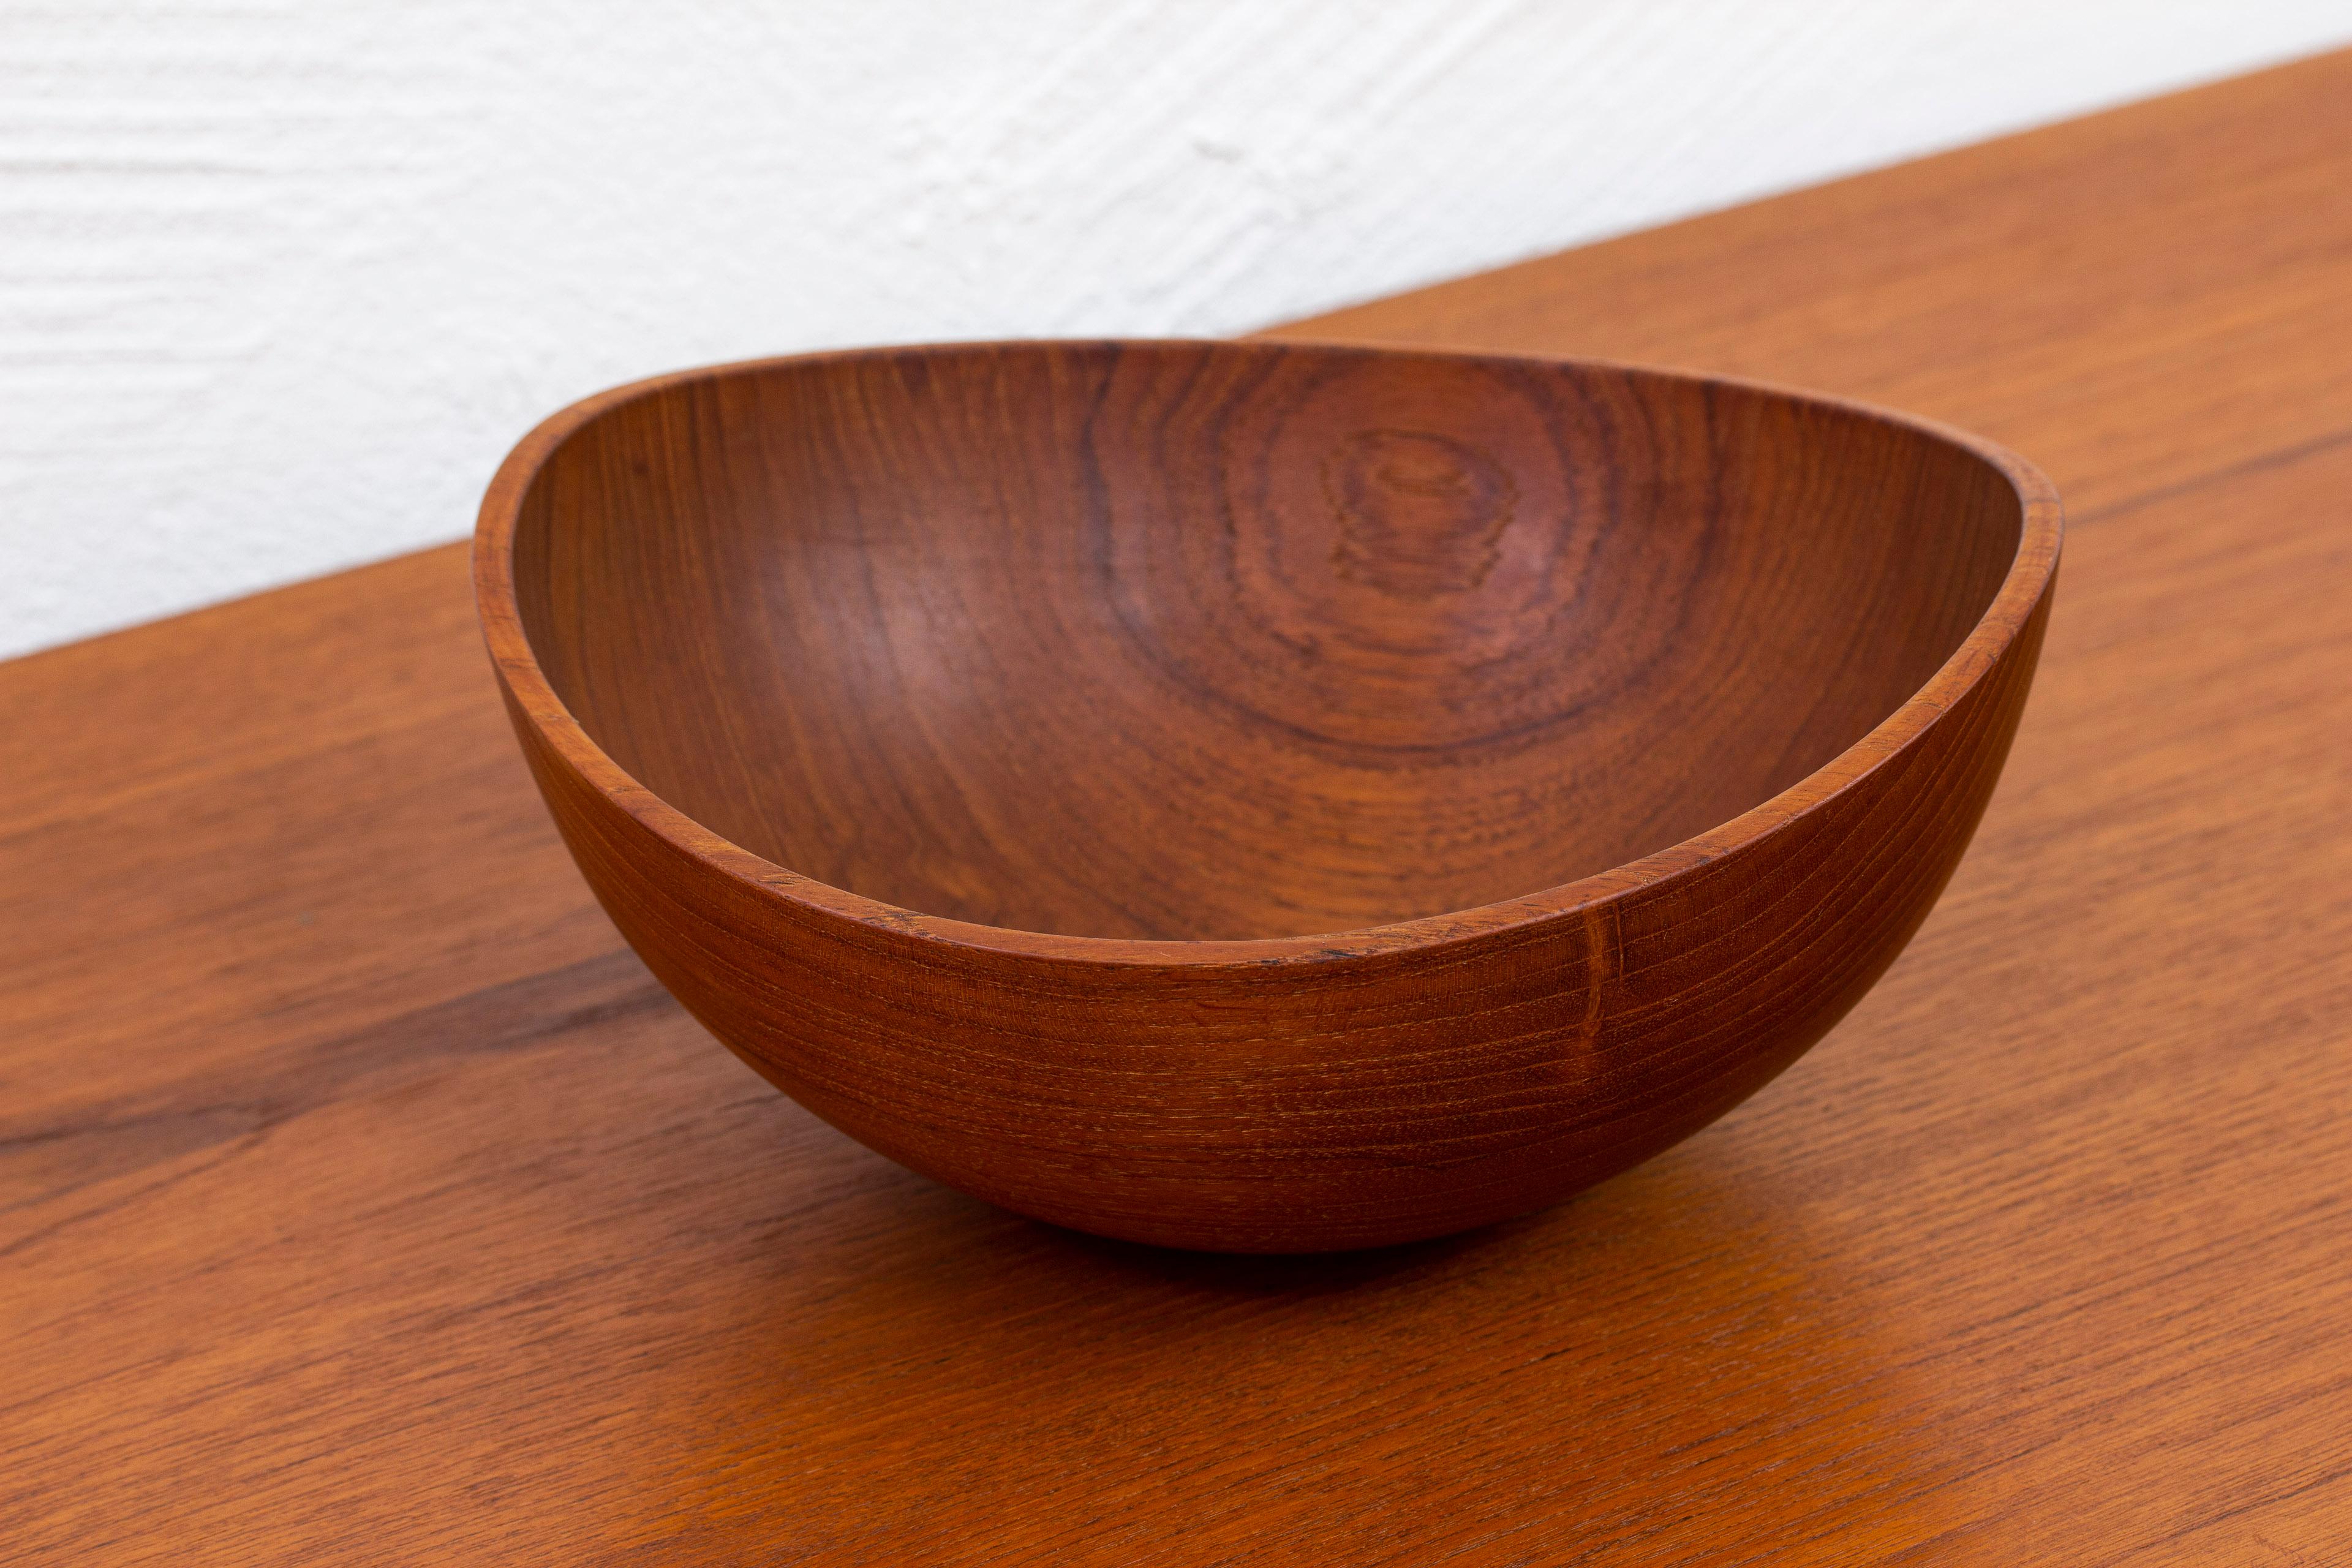 Bowl designed and made by Arvid Bergenblad during the 1950s. Hand made from solid teak. Signed with impressed burn mark. Very good vintage condition with light age related wear and patina.